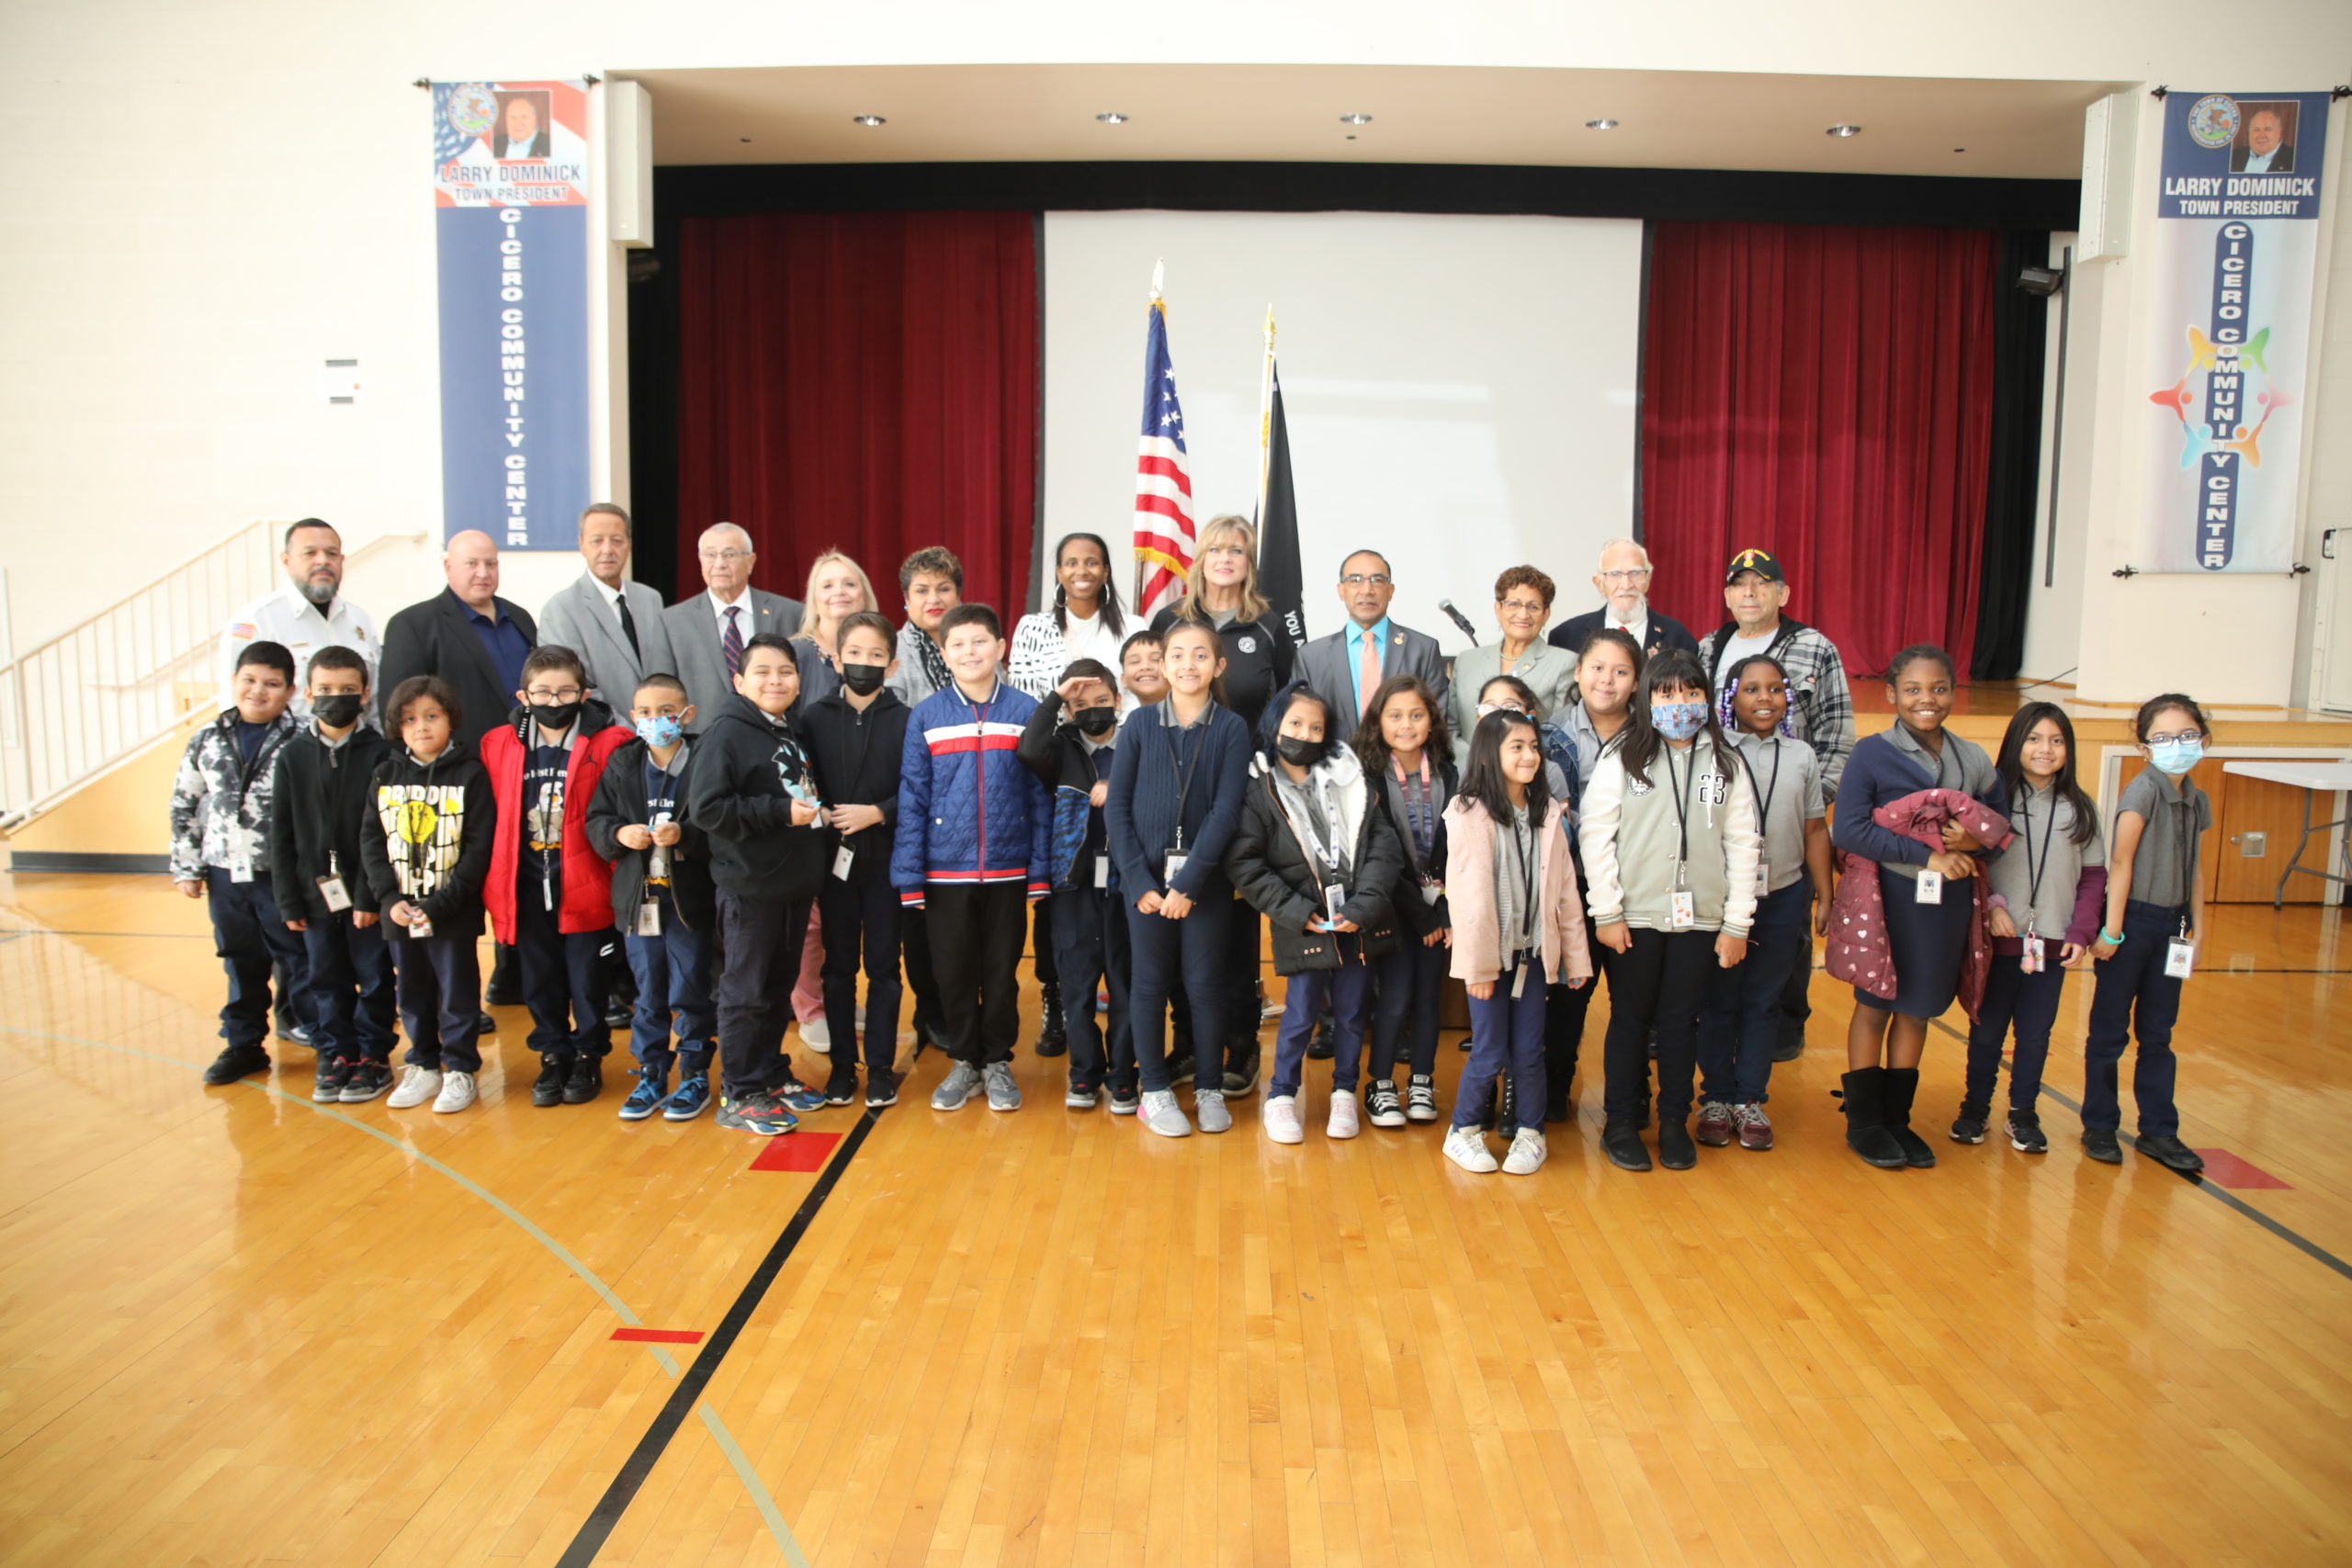 Cicero honors veterans at commemoration featuring VA official on Wednesday, November 9, 2022. Guest speaker was  Shynae Murphy, the Veteran Service Office with Illinois Department of Veterans Affairs, who discussed the state’s services and her own service in the U.S. Navy.